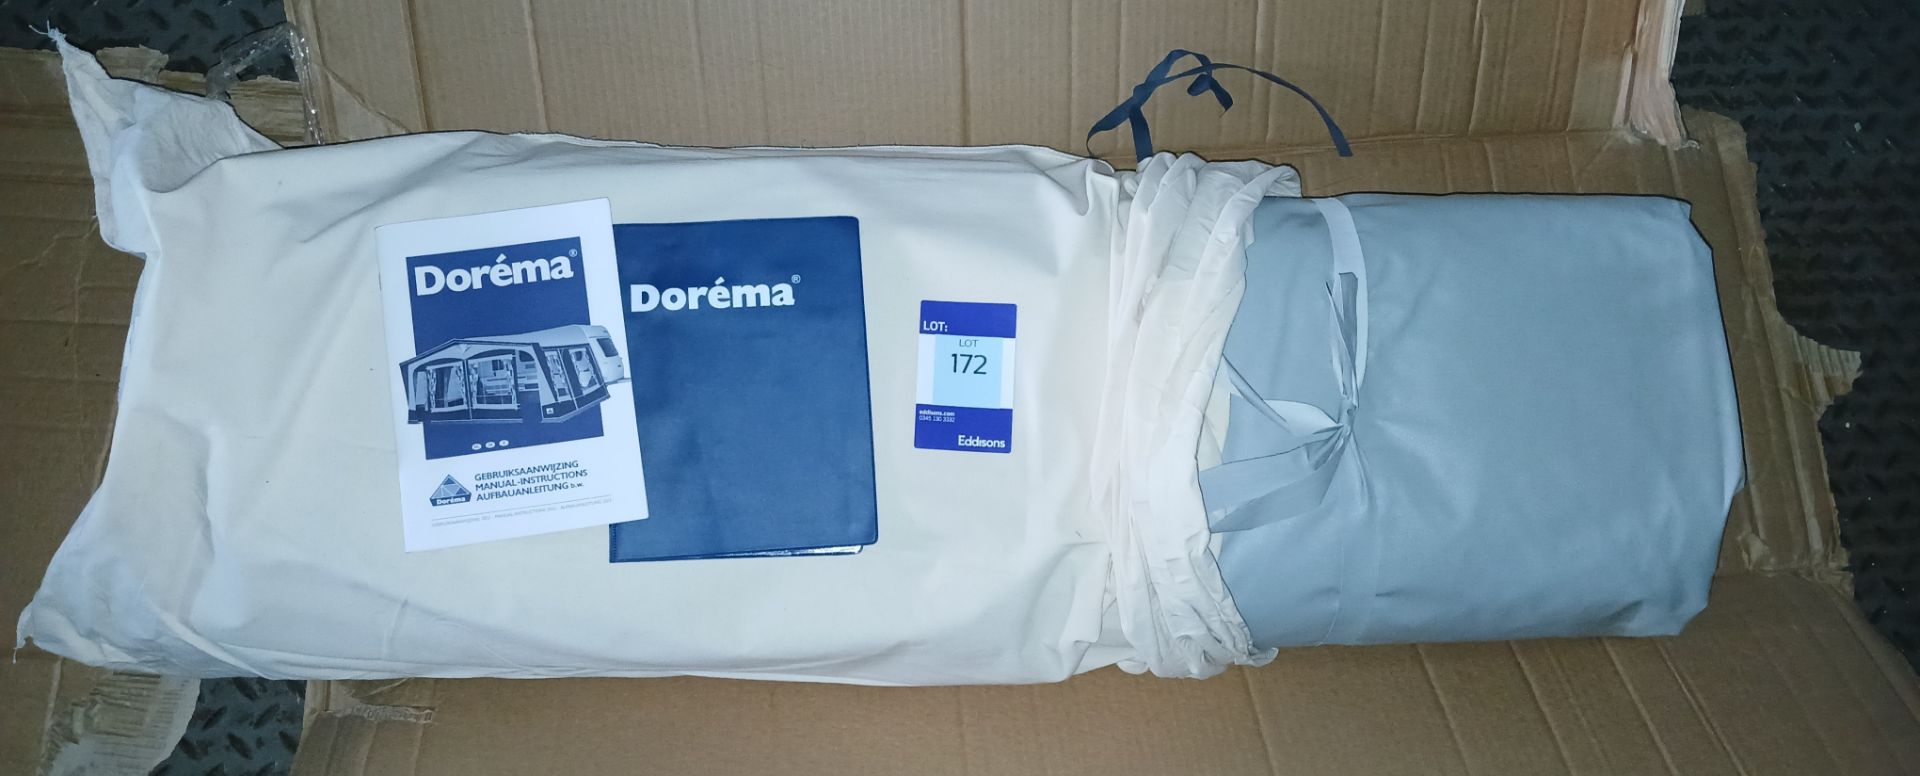 Dorema Garda 240 All Season Awning (Please note, Viewing Strongly Recommended - Eddisons have not